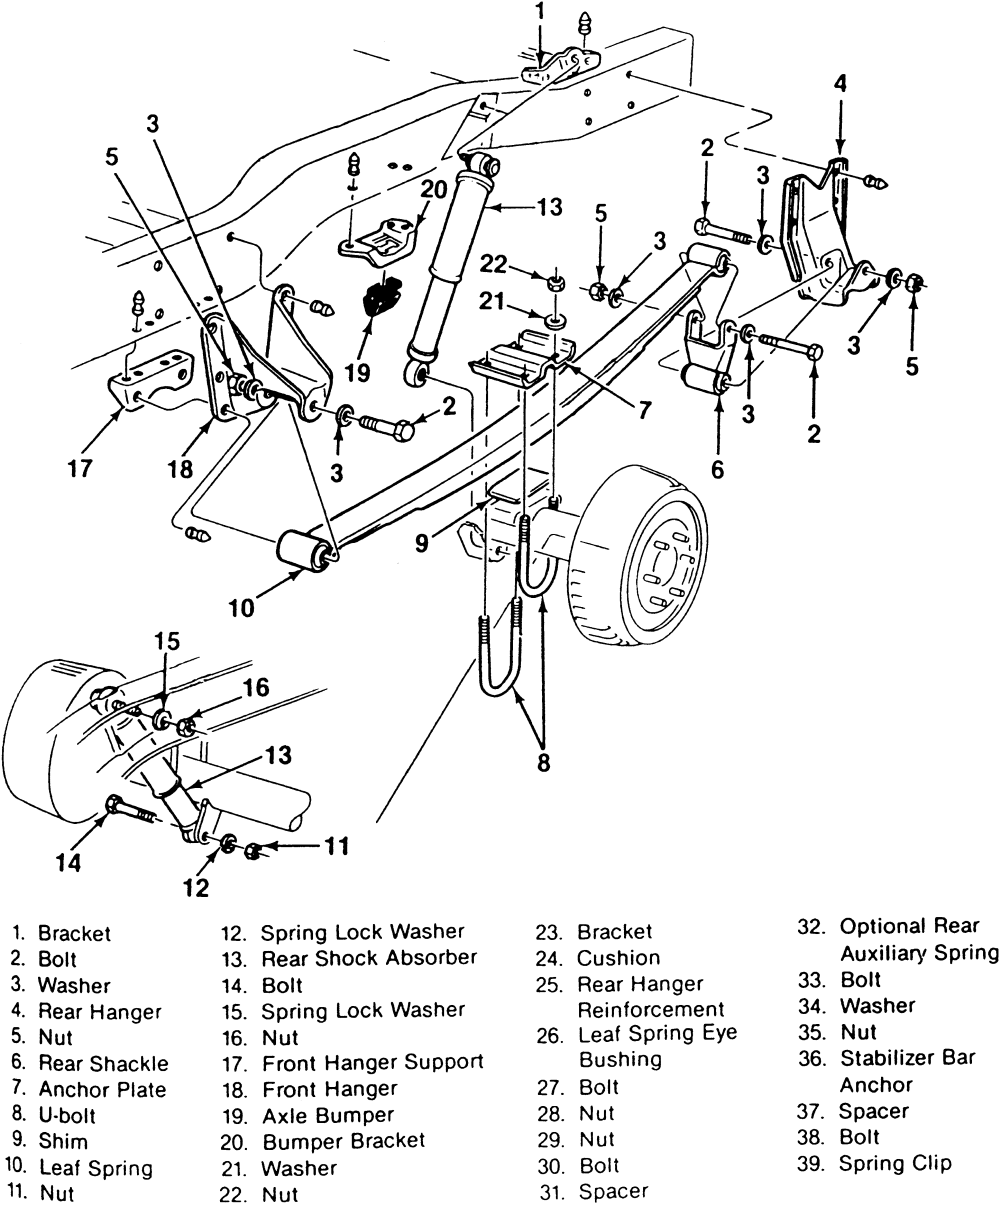 Leaf spring rebuild parts - Ford Truck Enthusiasts Forums 88 ford e 150 wiring diagram 